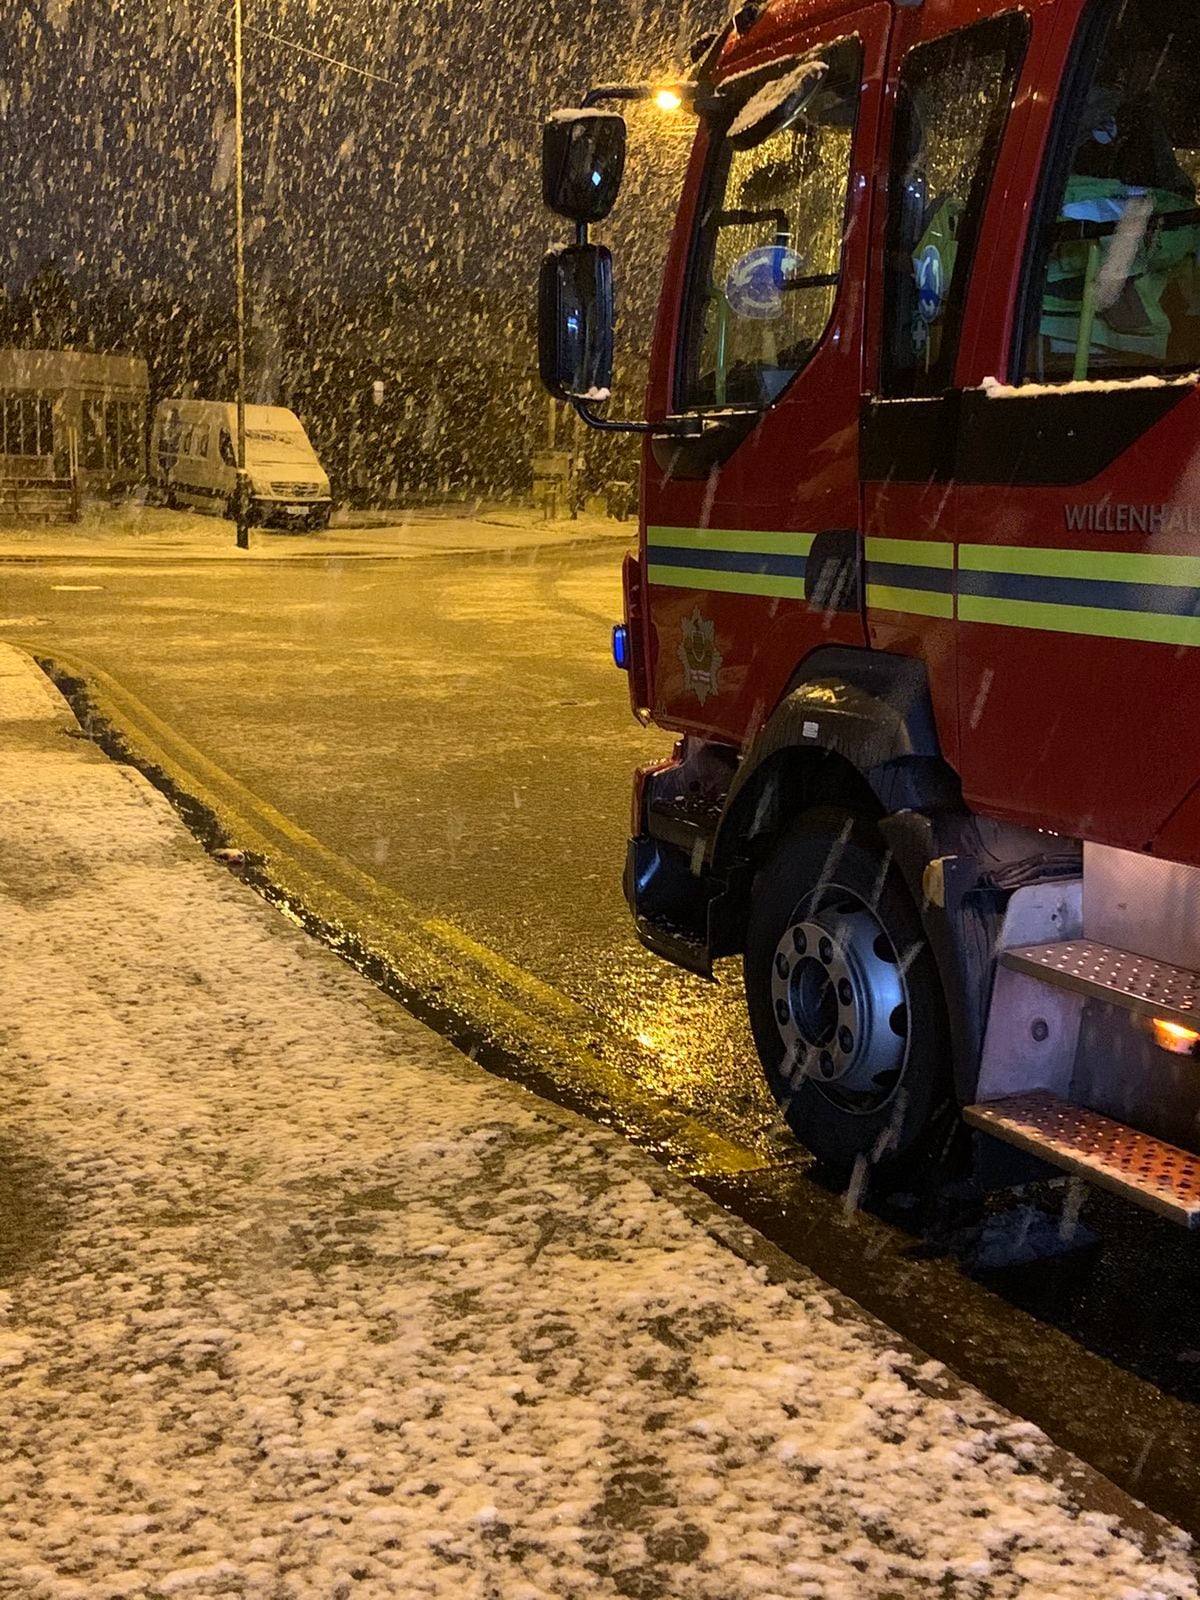 Snow blanketed the Black Country this morning. Photo: Willenhall Fire Station